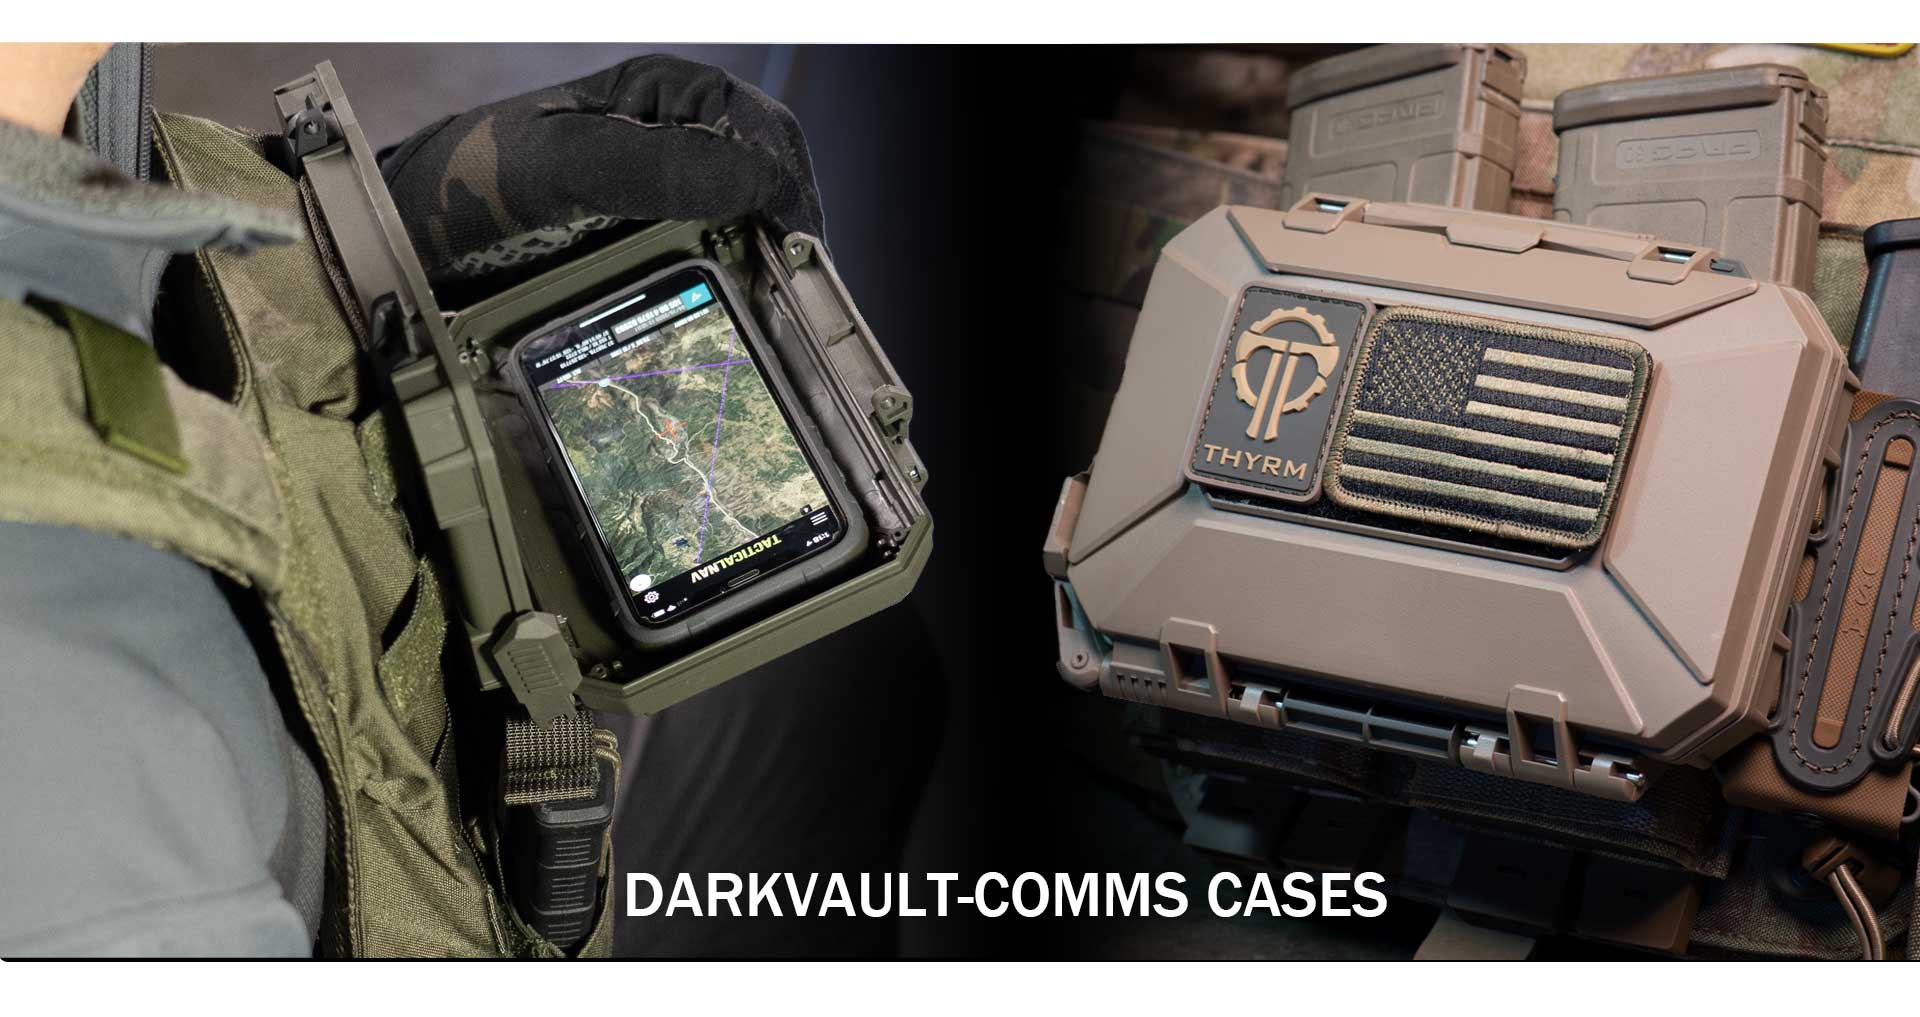 DarkVaylt-Comms Cases as navigation board and storage on a chest rig